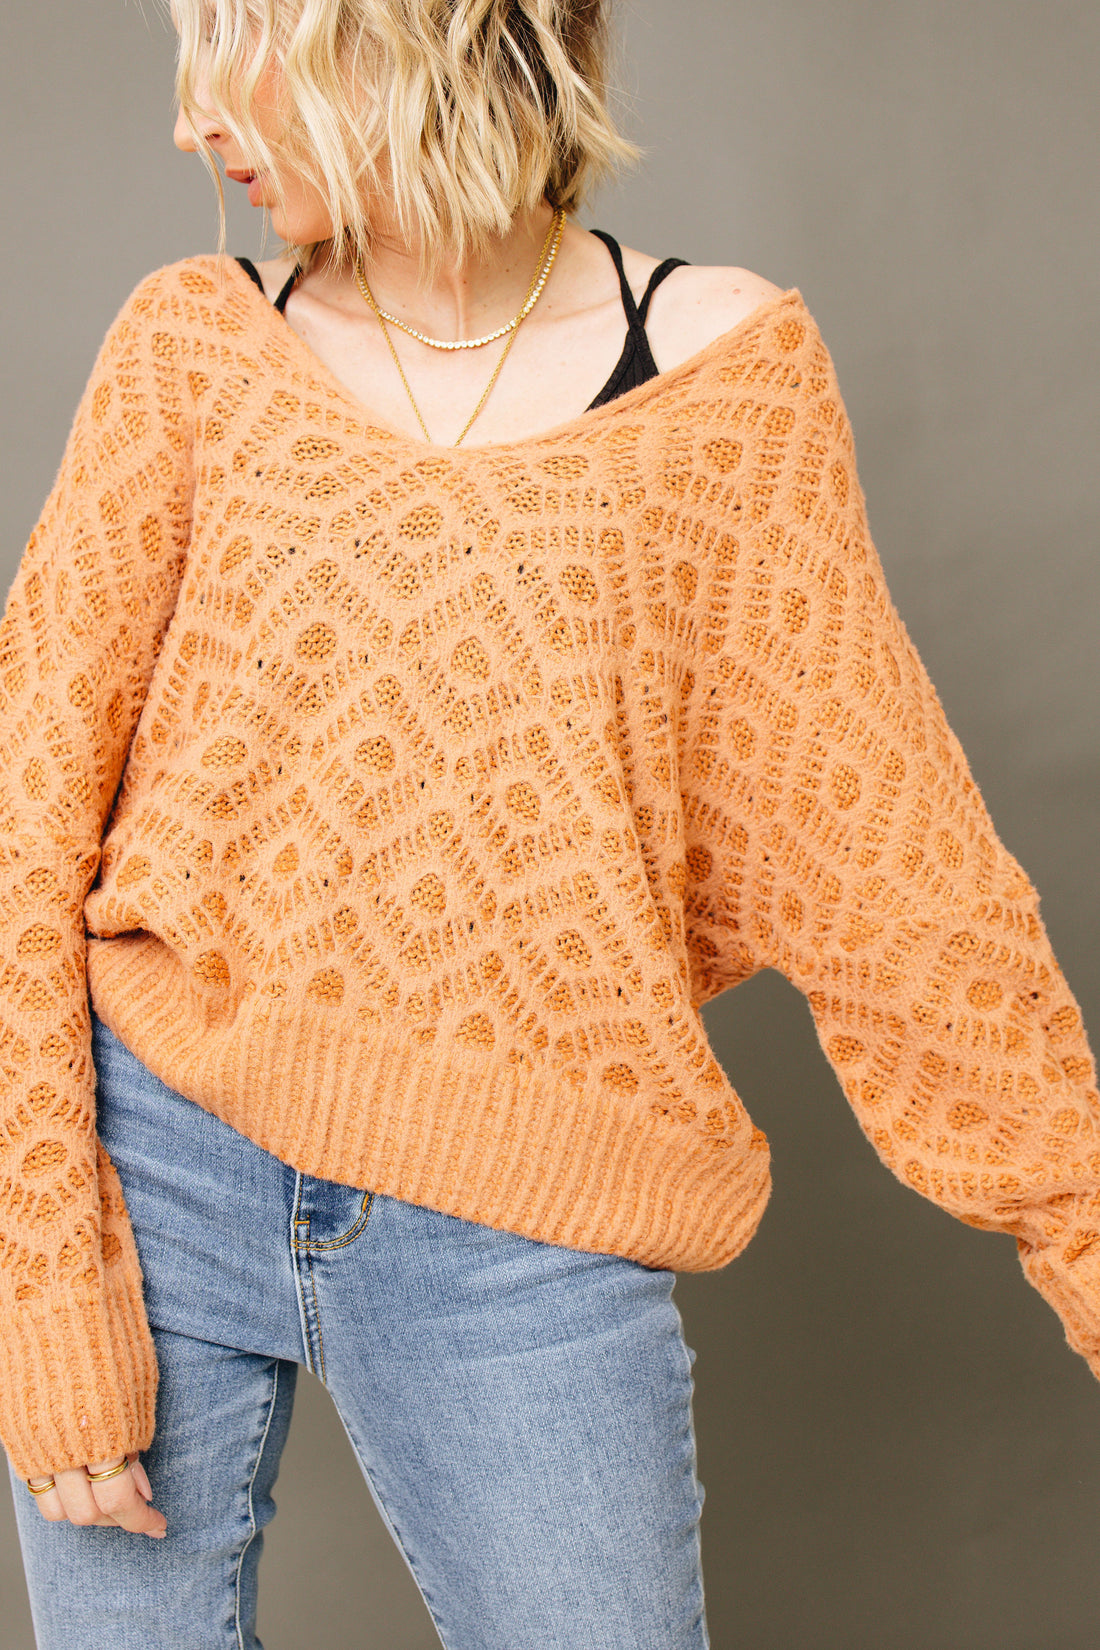 Simply Perfect V-Neck Patterned Sweater (S-L)